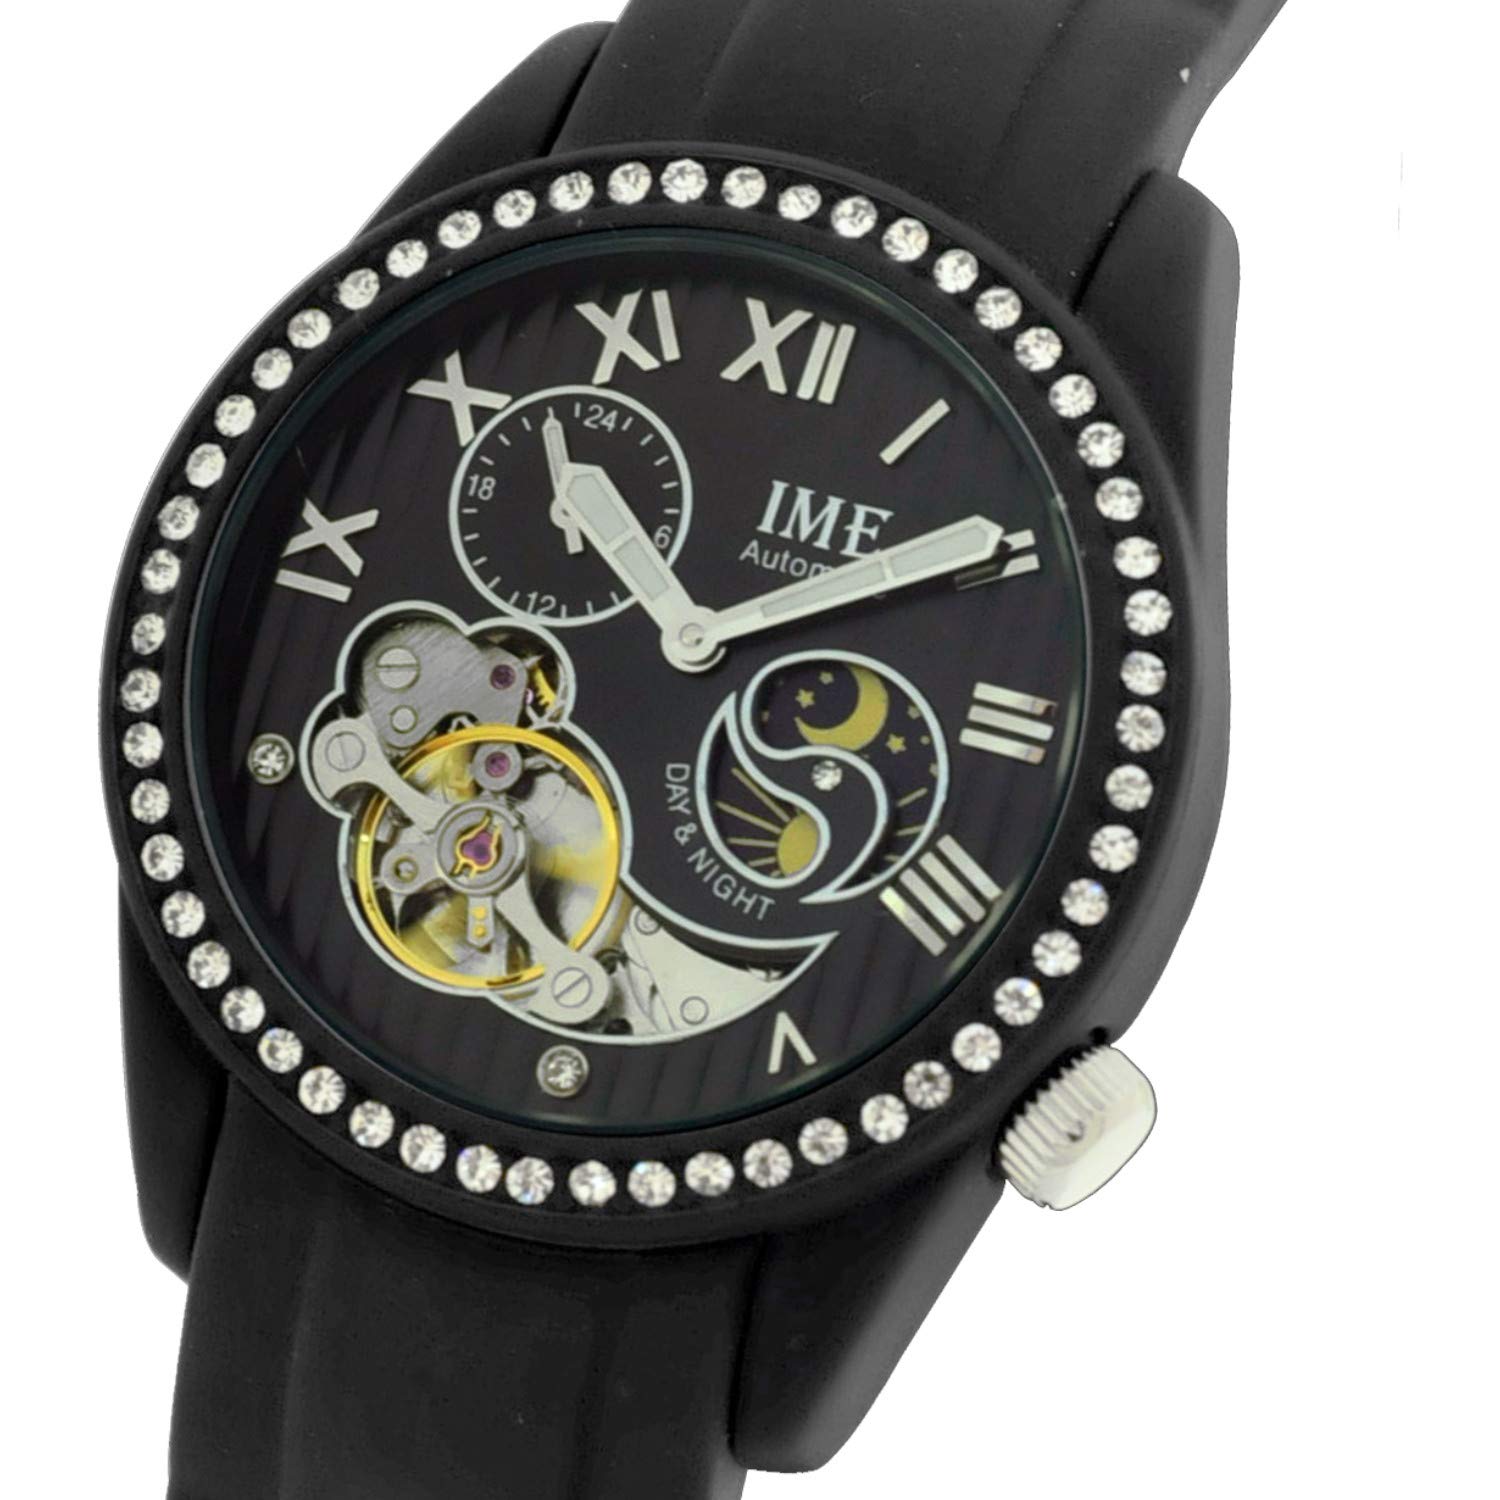 IME Ladies Fashion Automatic Wrist Watch with Alloy Case, Sun & Moon Phase and 24 Hours Display, Czech Stone Show on The Case